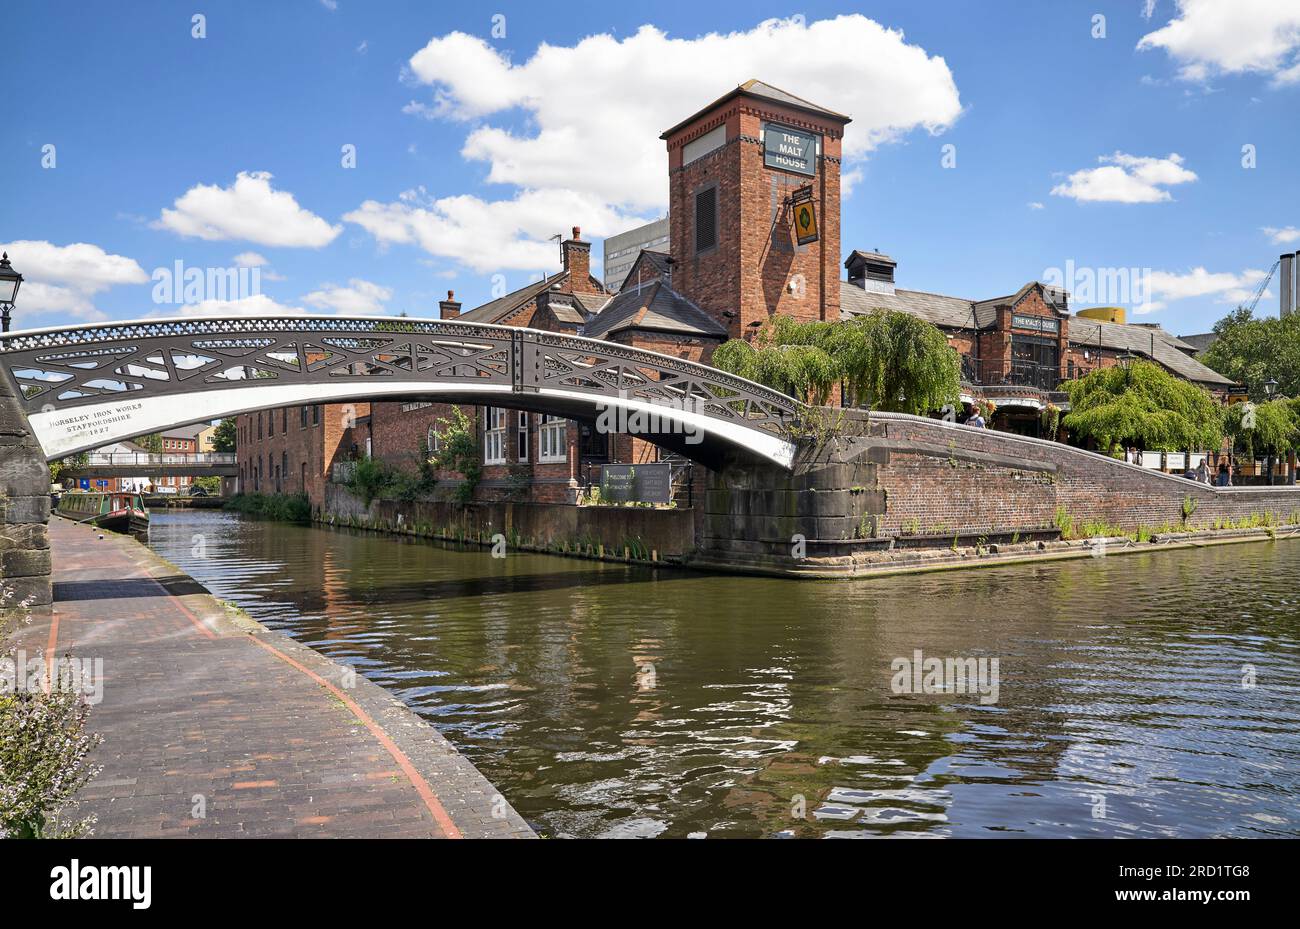 Old Turn Junction on the canal at Brindley Place, canal, Birmingham city centre with The Malt House pub in the distance. England UK Stock Photo